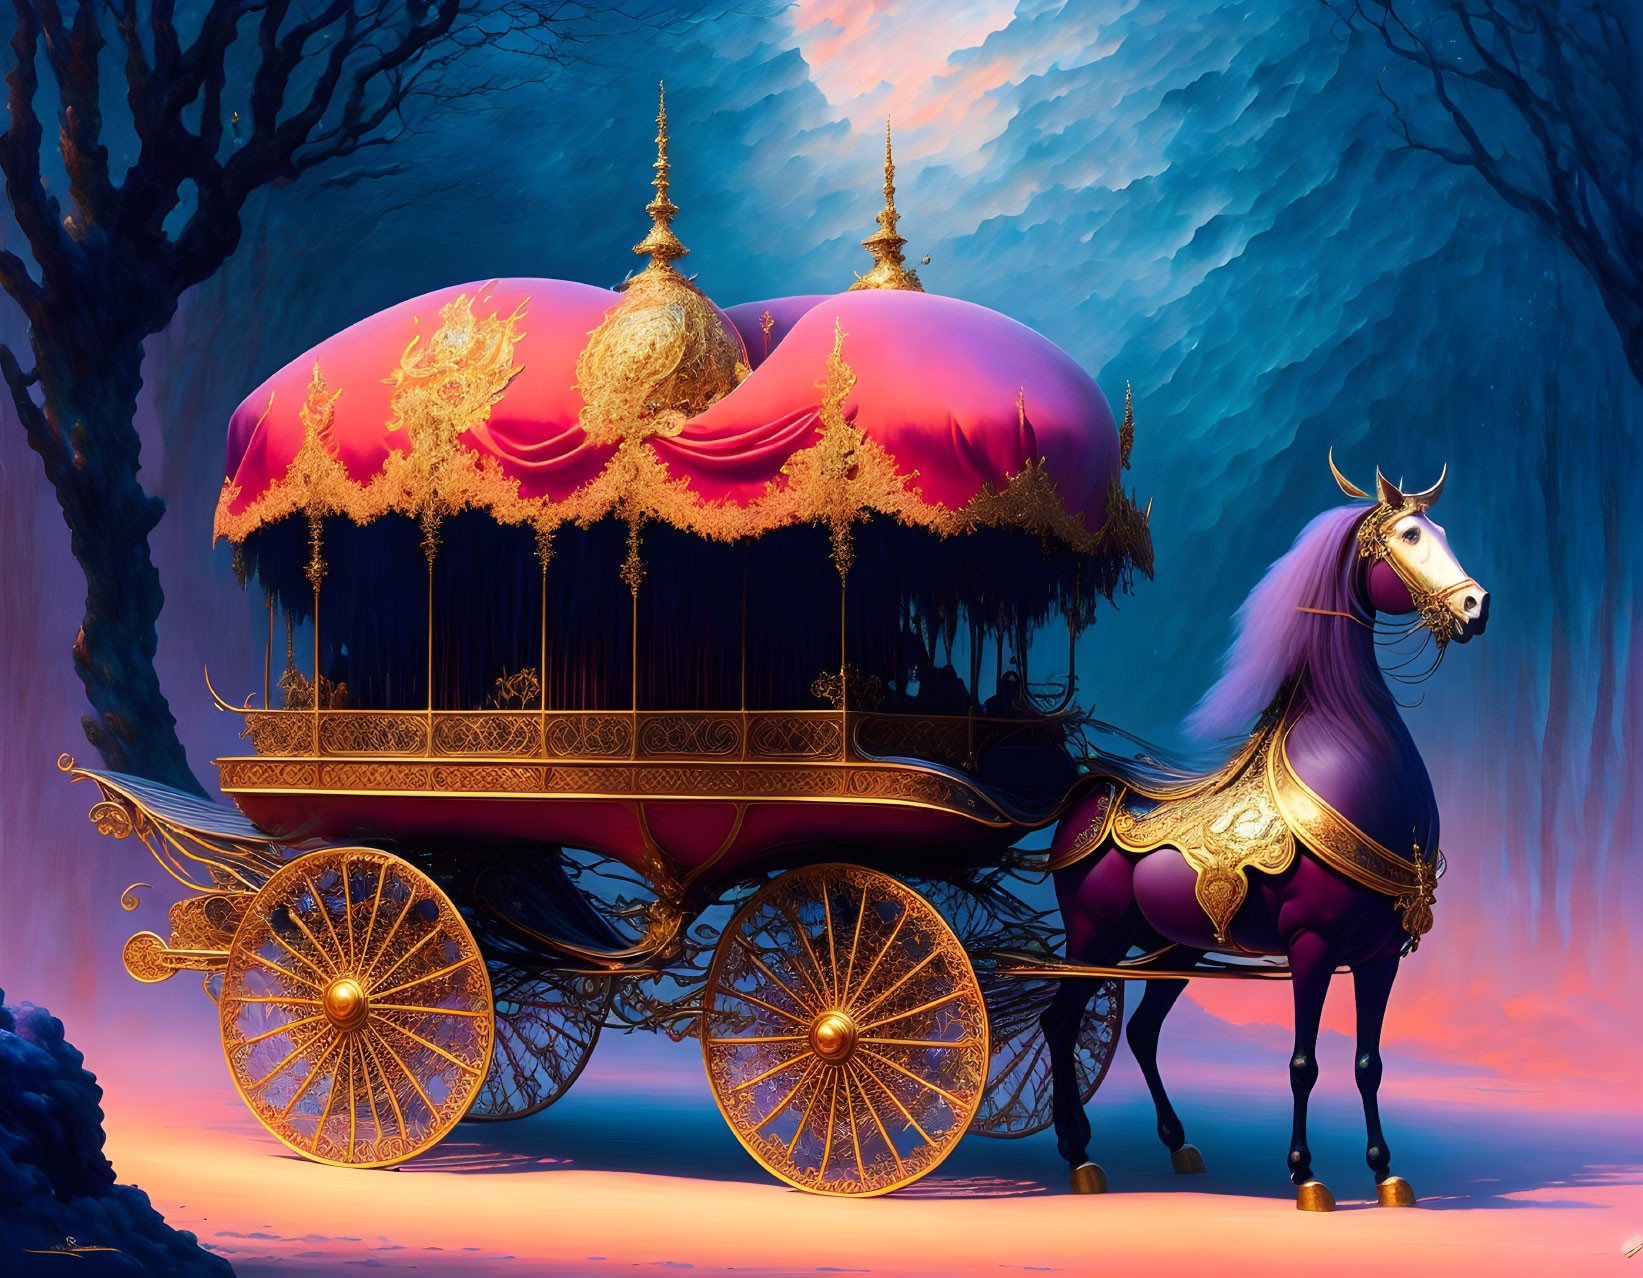 The Count’s Magical Carriage